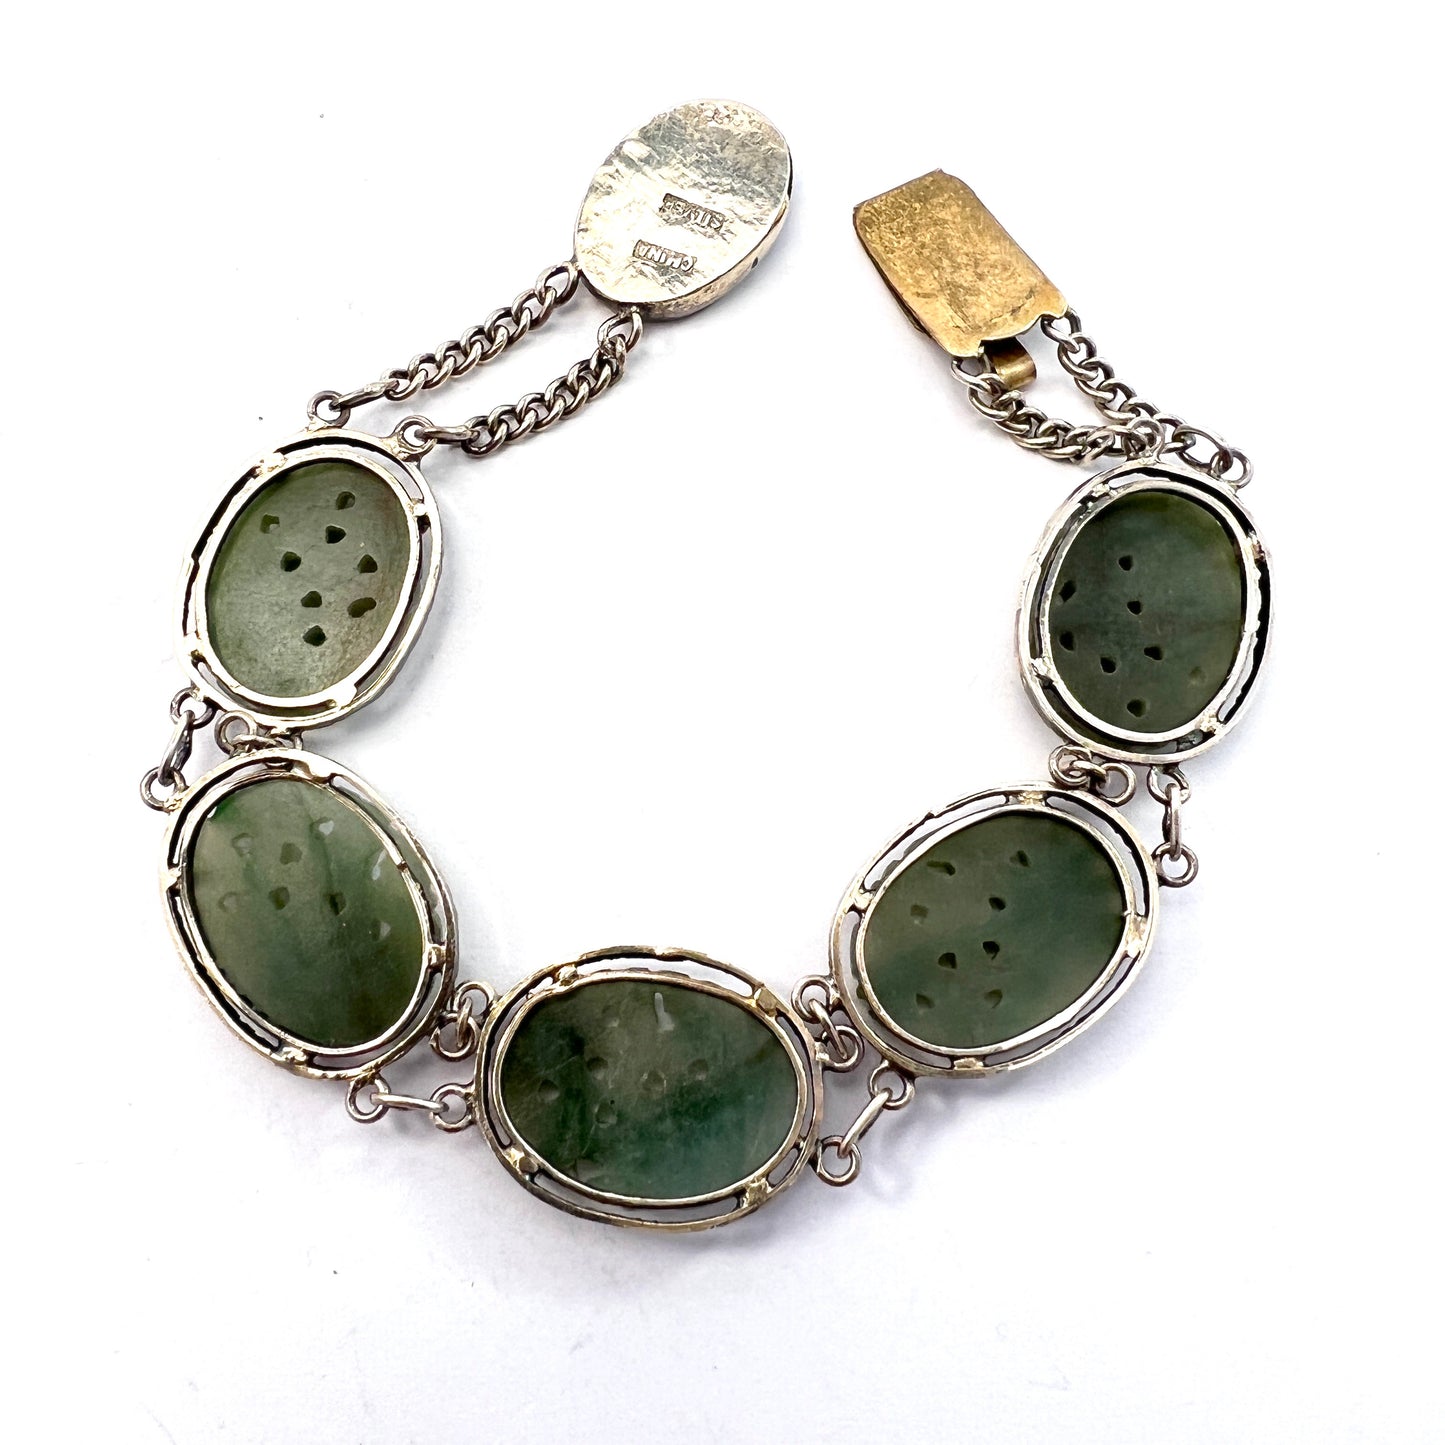 Chinese Export c 1930. Solid Silver Carved Jade Bracelet. Hallmarked China.